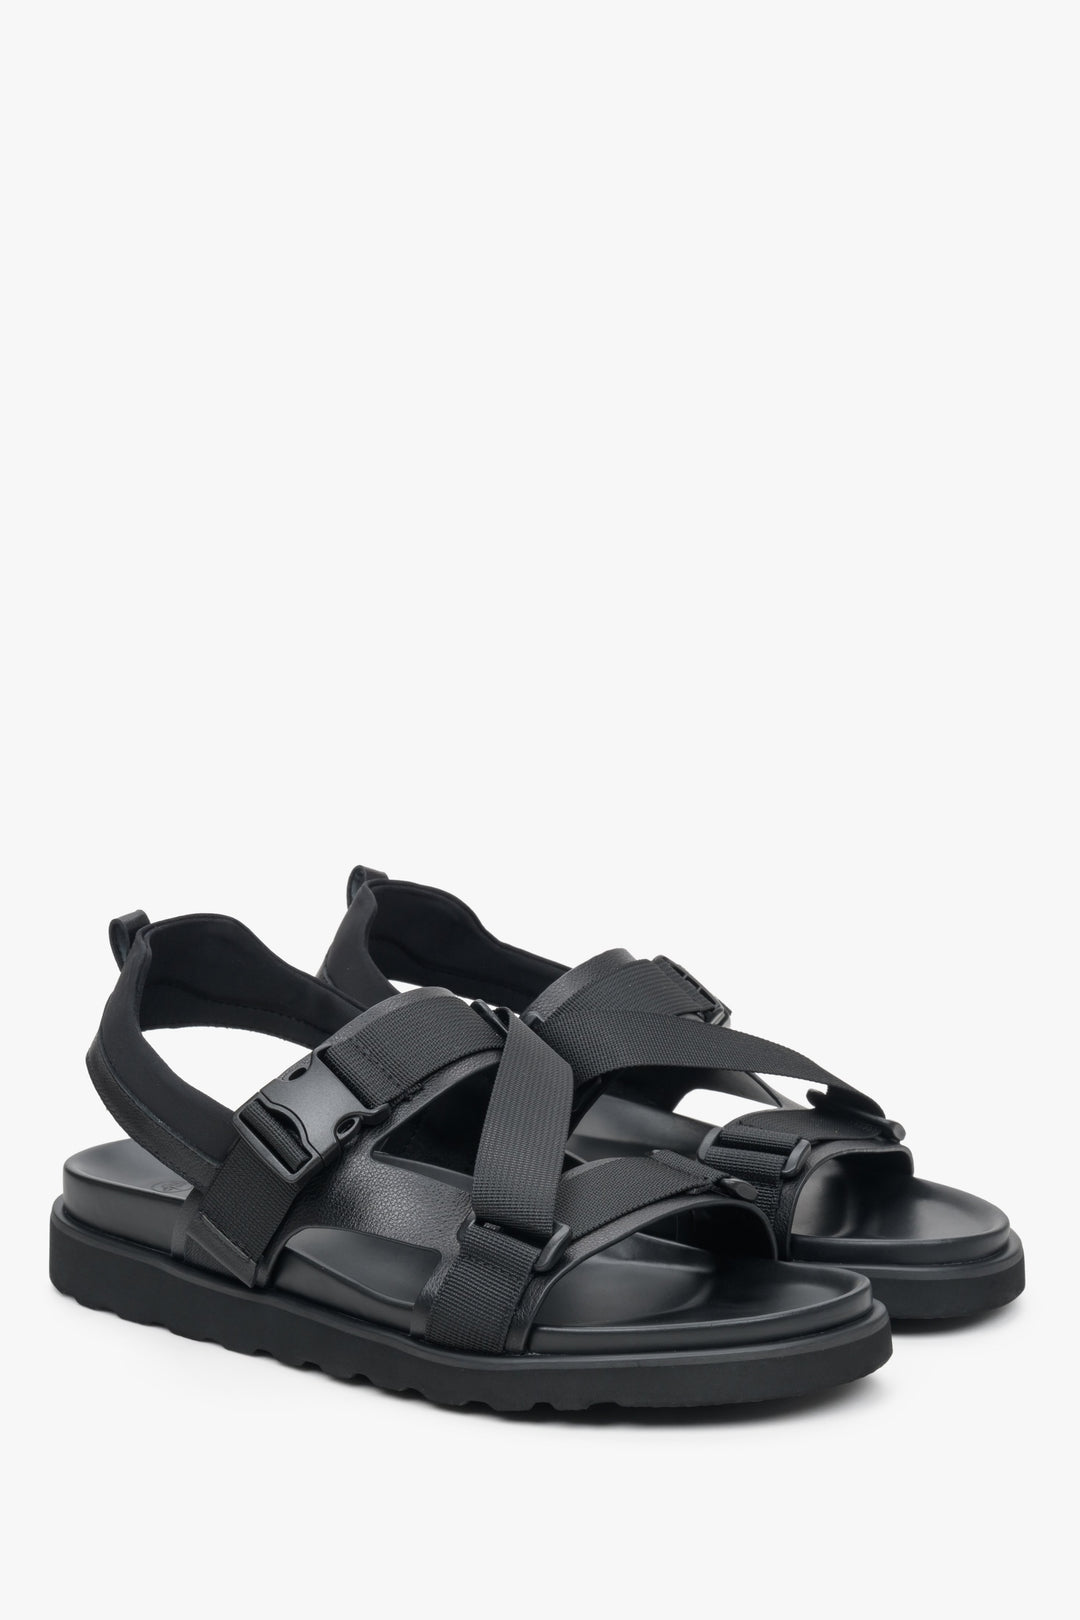 Estro men's buckle-strap sandals made of mixed materials - close-up on the toe of the shoes.